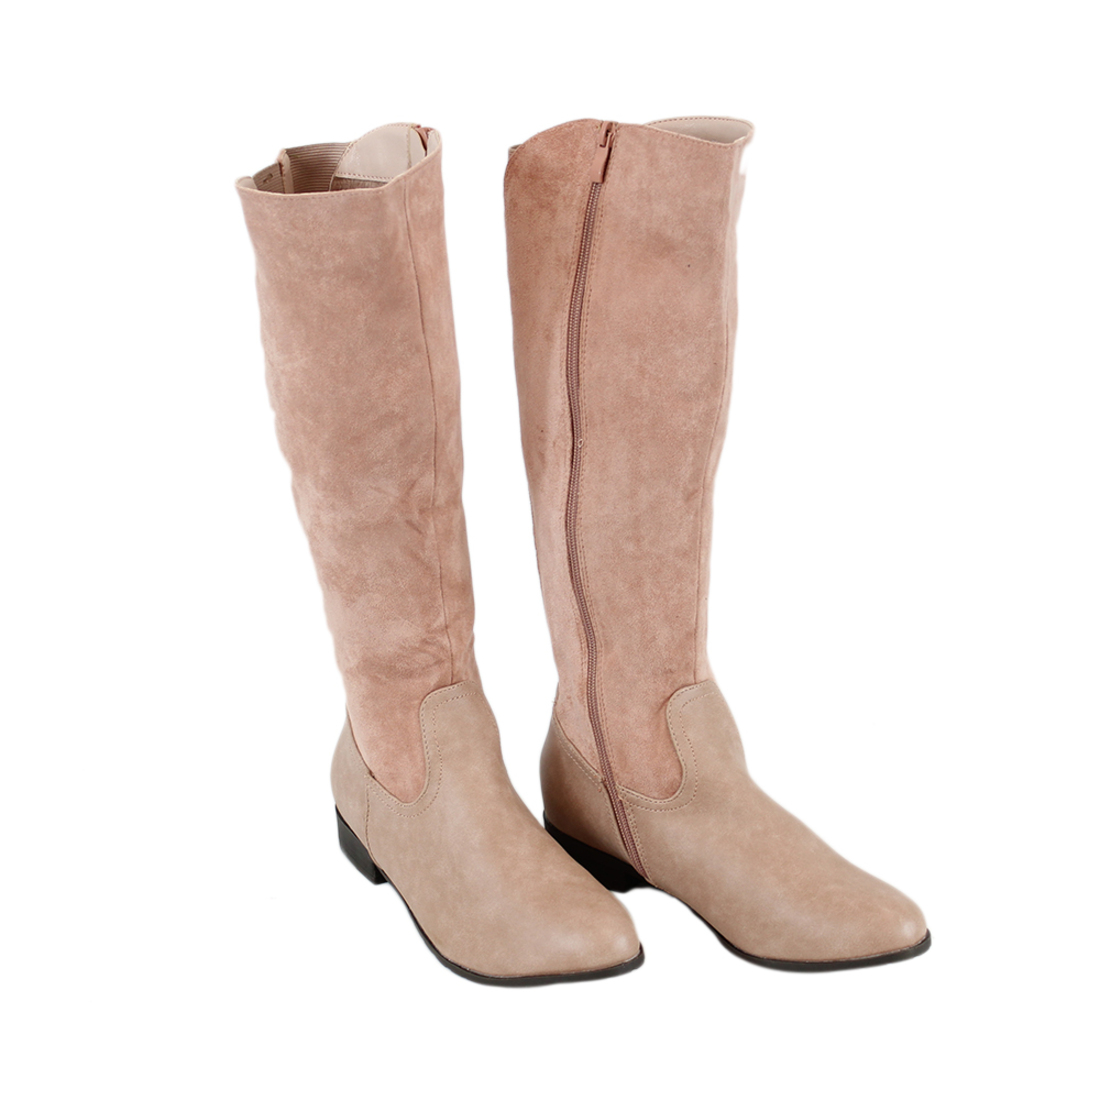 * Suede leather knee-hight flat boots